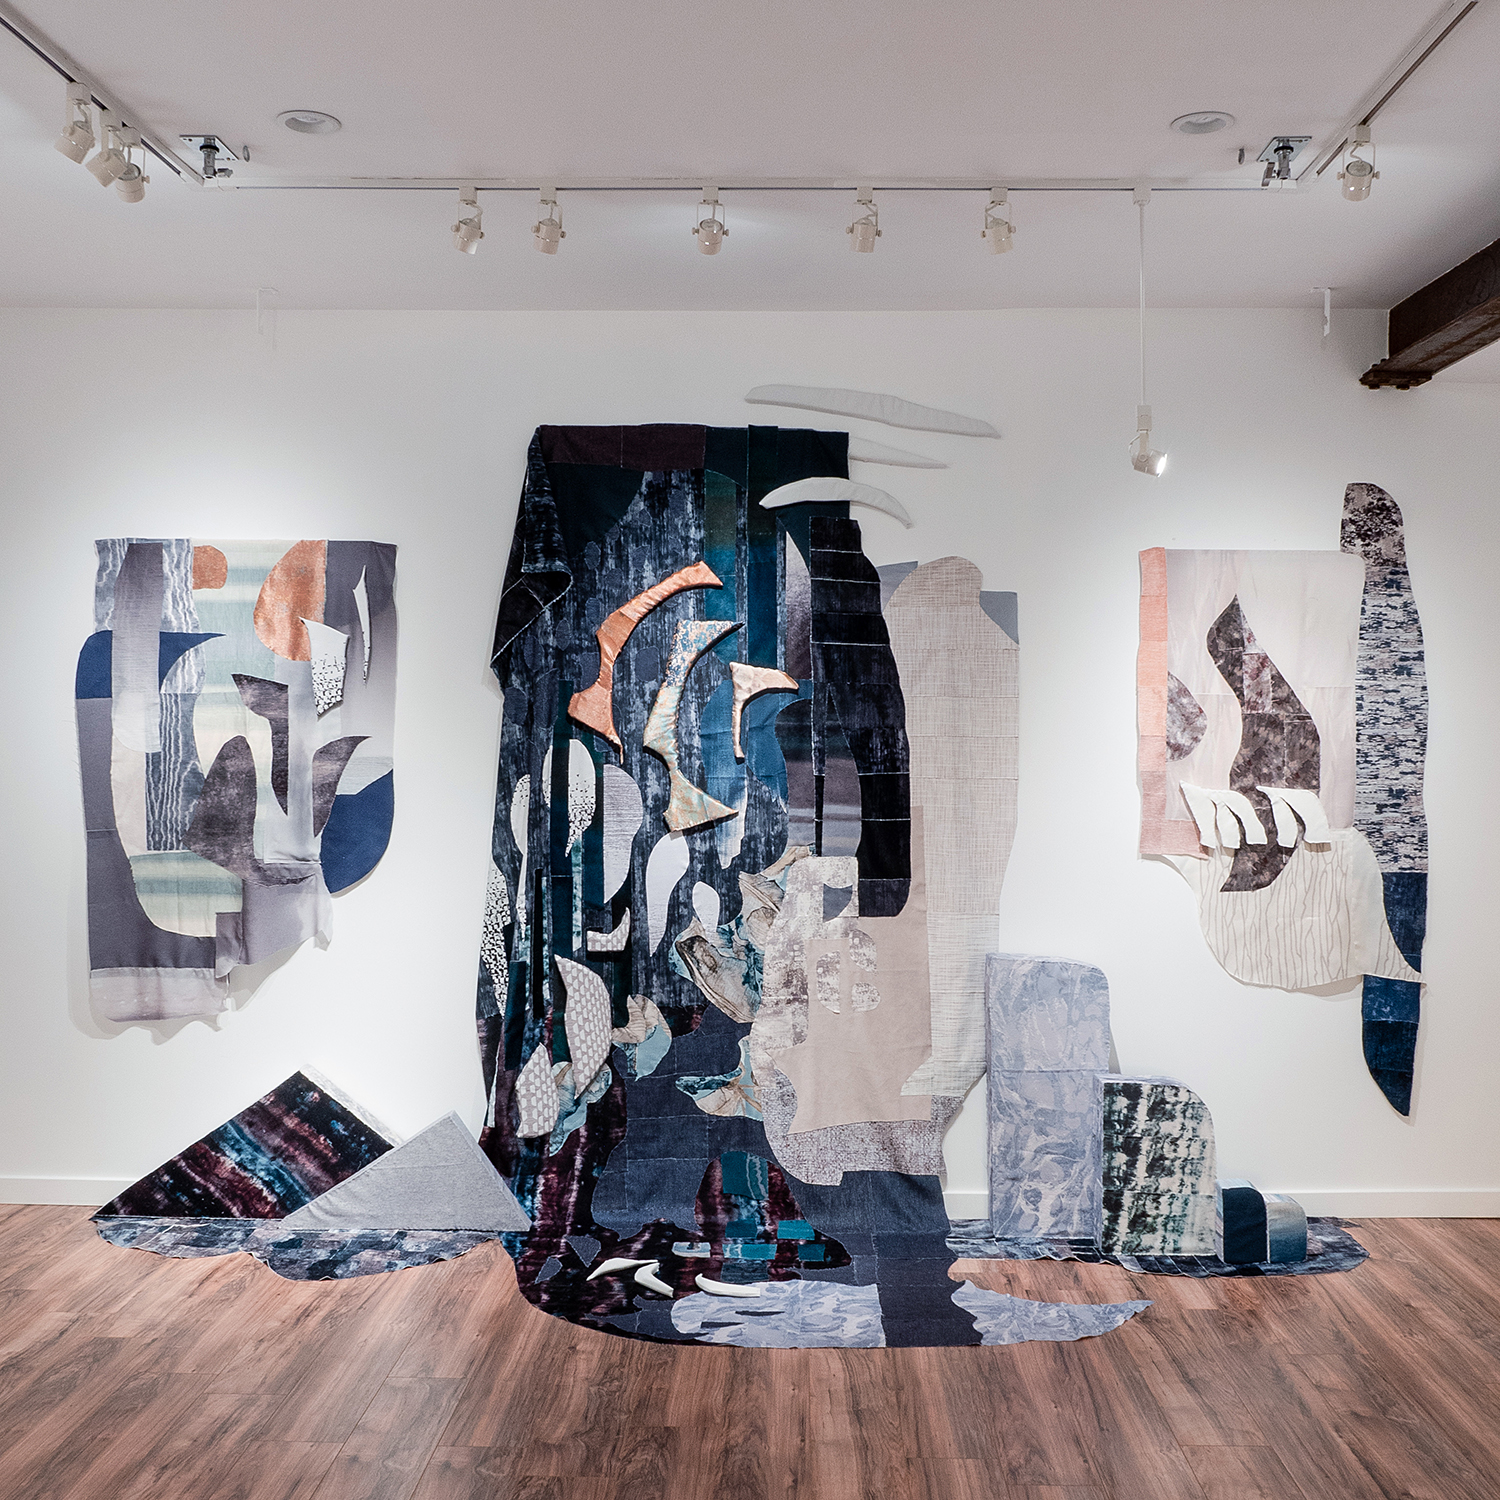 7 Worlds, 2020, Three-dimensional applique with reclaimed fabric and upcycled foam inserts, Dimensions variable (pictured: 16 x 9 x 4 ft)